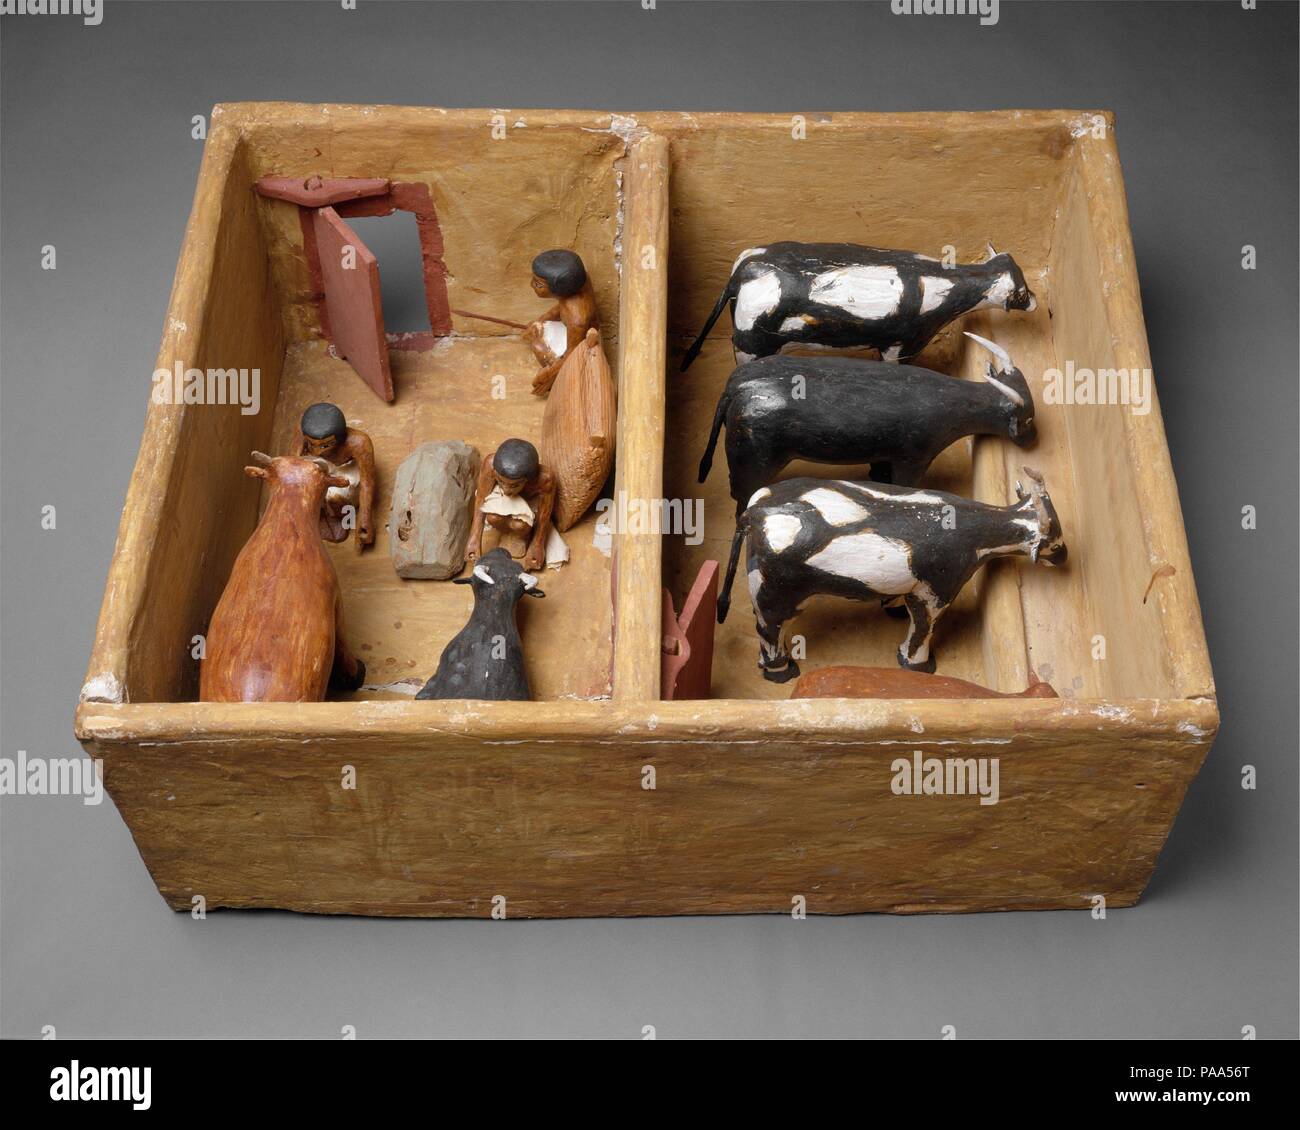 Model Cattle stable from the tomb of Meketre. Dimensions: l. 72.5 cm (28 9/16 in); w. 57 cm (22 7/16 in); h. 28.5 cm (11 1/4 in)  average height of cattle: 18 cm (7 1/16 in.). Dynasty: Dynasty 12. Reign: reign of Amenemhat I, early. Date: ca. 1981-1975 B.C..  This model of a stable was found with twenty three other models of boats, gardens, and workshops in a hidden chamber at the side of the passage leading into the rock cut tomb of the royal chief steward Meketre, who began his career under King Nebhepetre Mentuhotep II of Dynasty 11 and continued to serve successive kings into the early yea Stock Photo